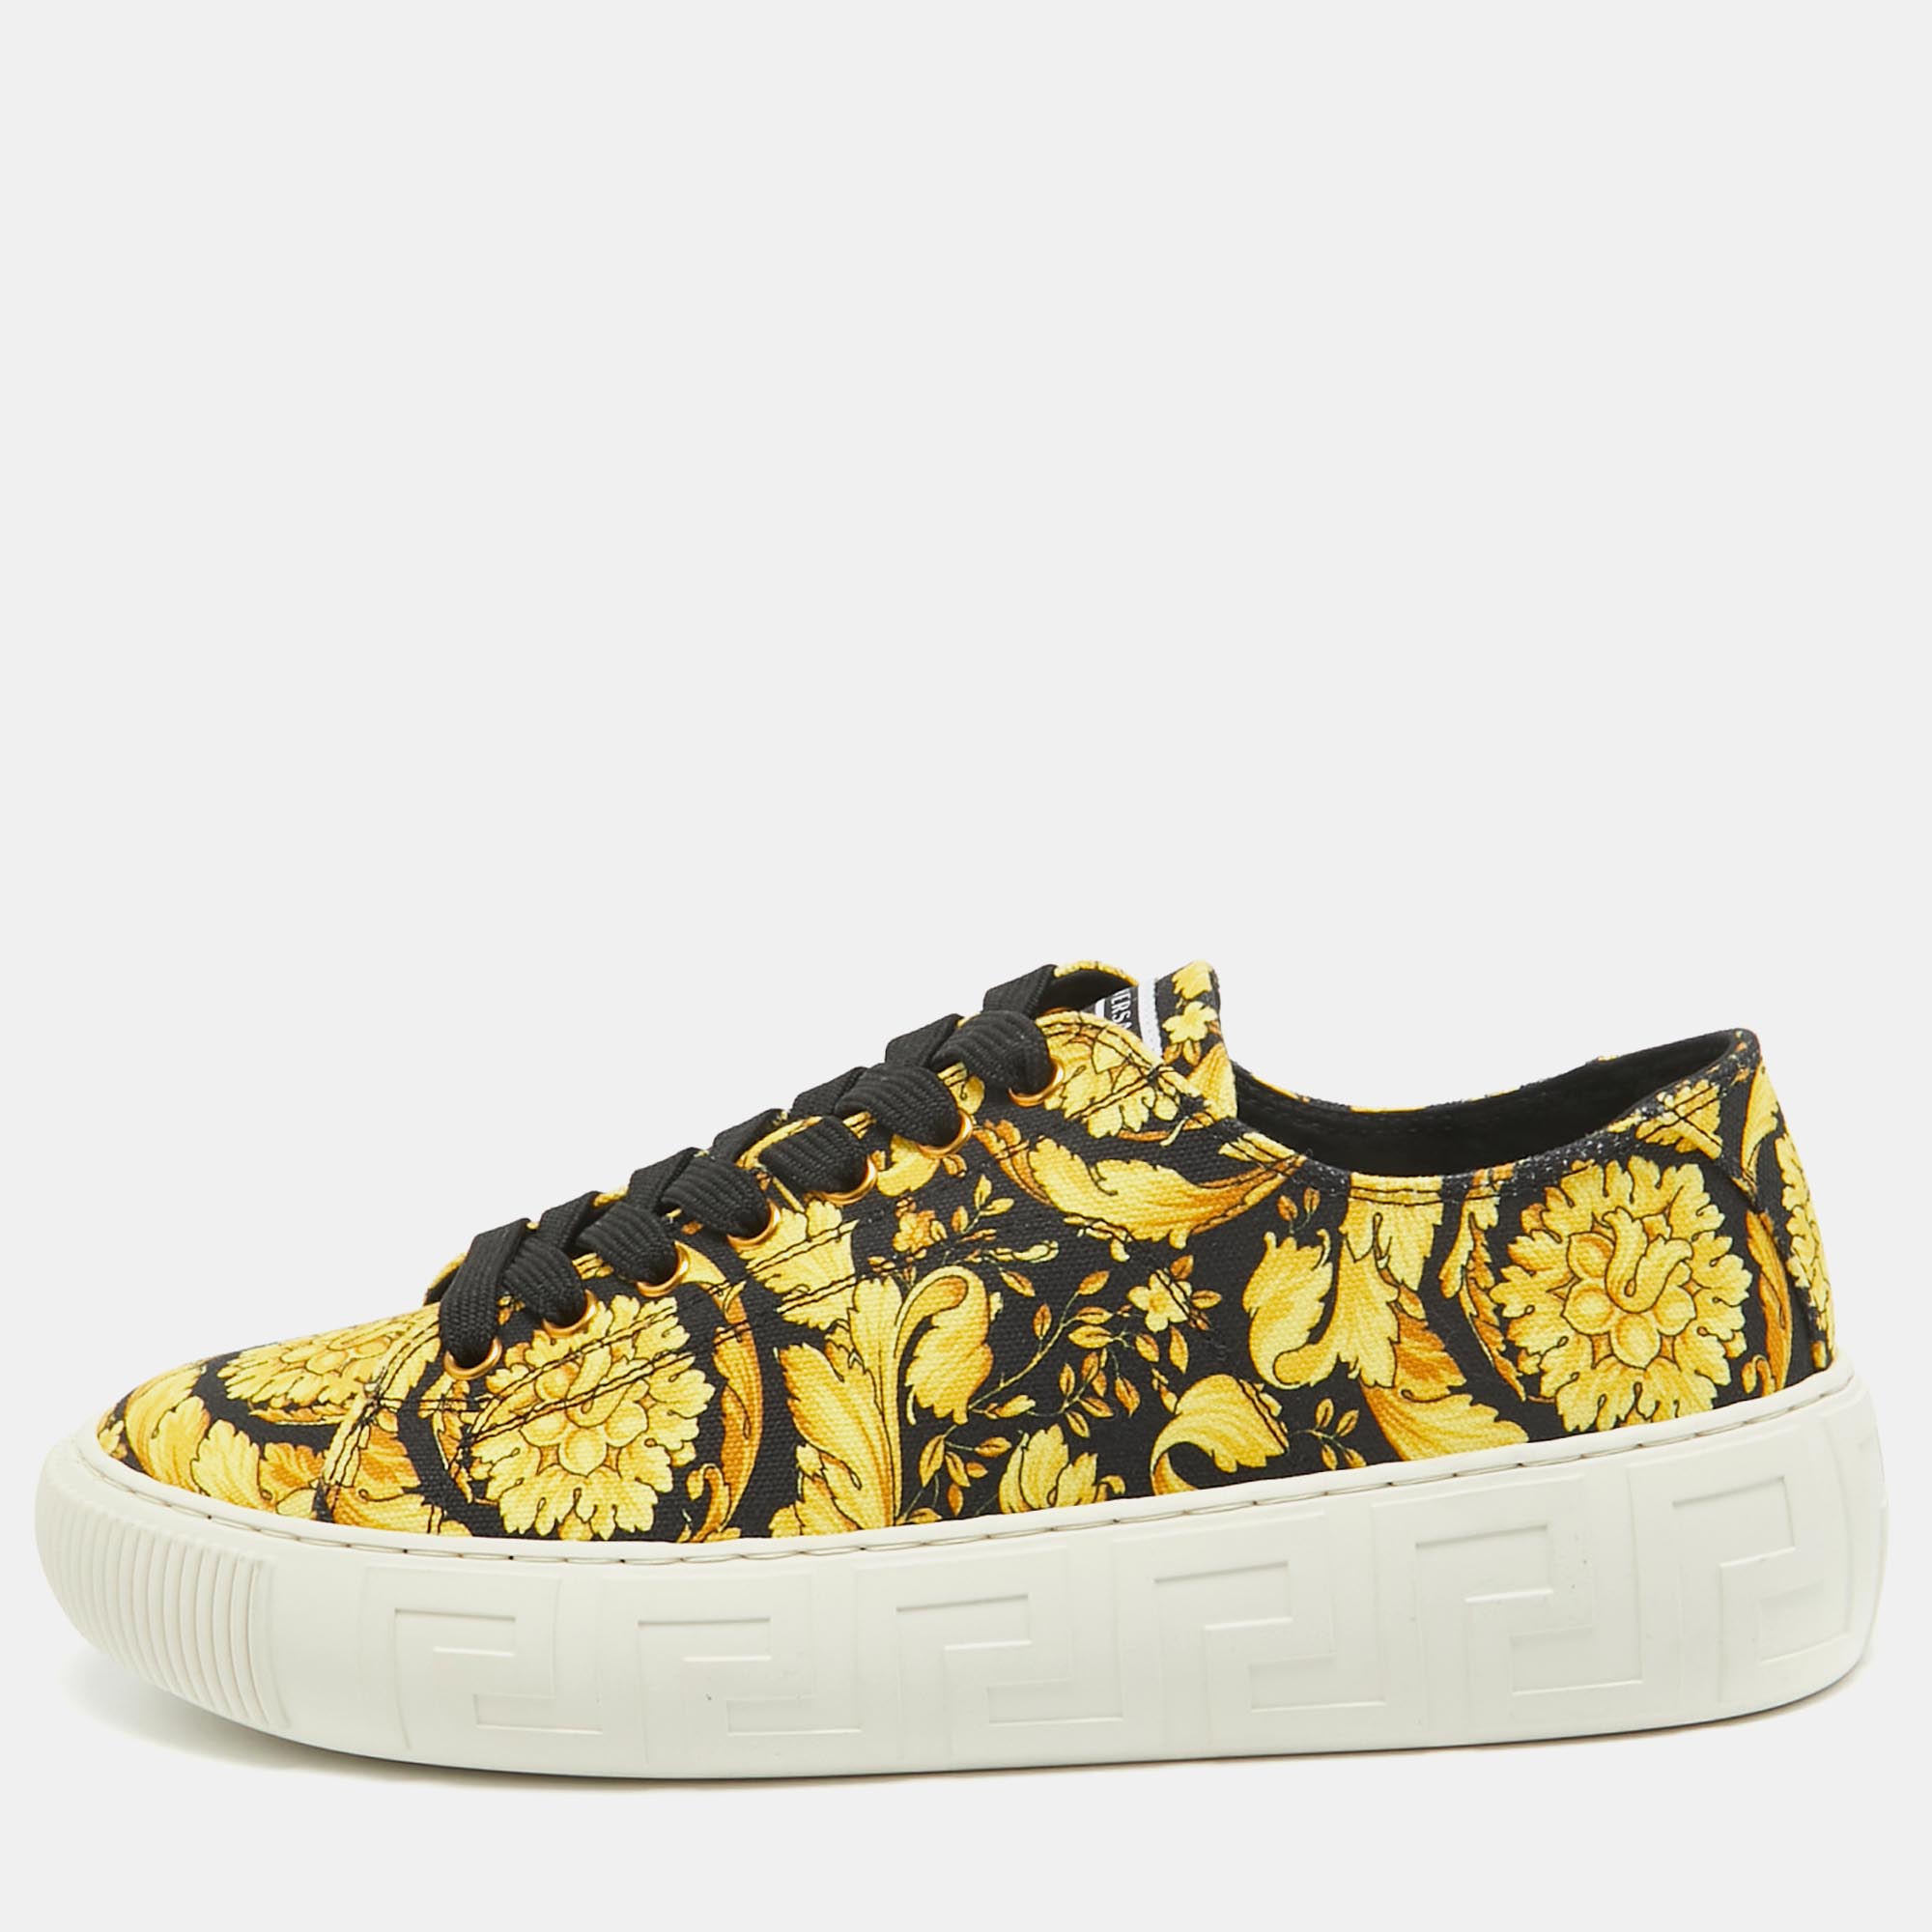 Designed to elevate your style quotient and give you comfort at the same time Versace brings you these lovely sneakers. Theyve been crafted from canvas and designed with Barocco prints lace ties and rubber soles.